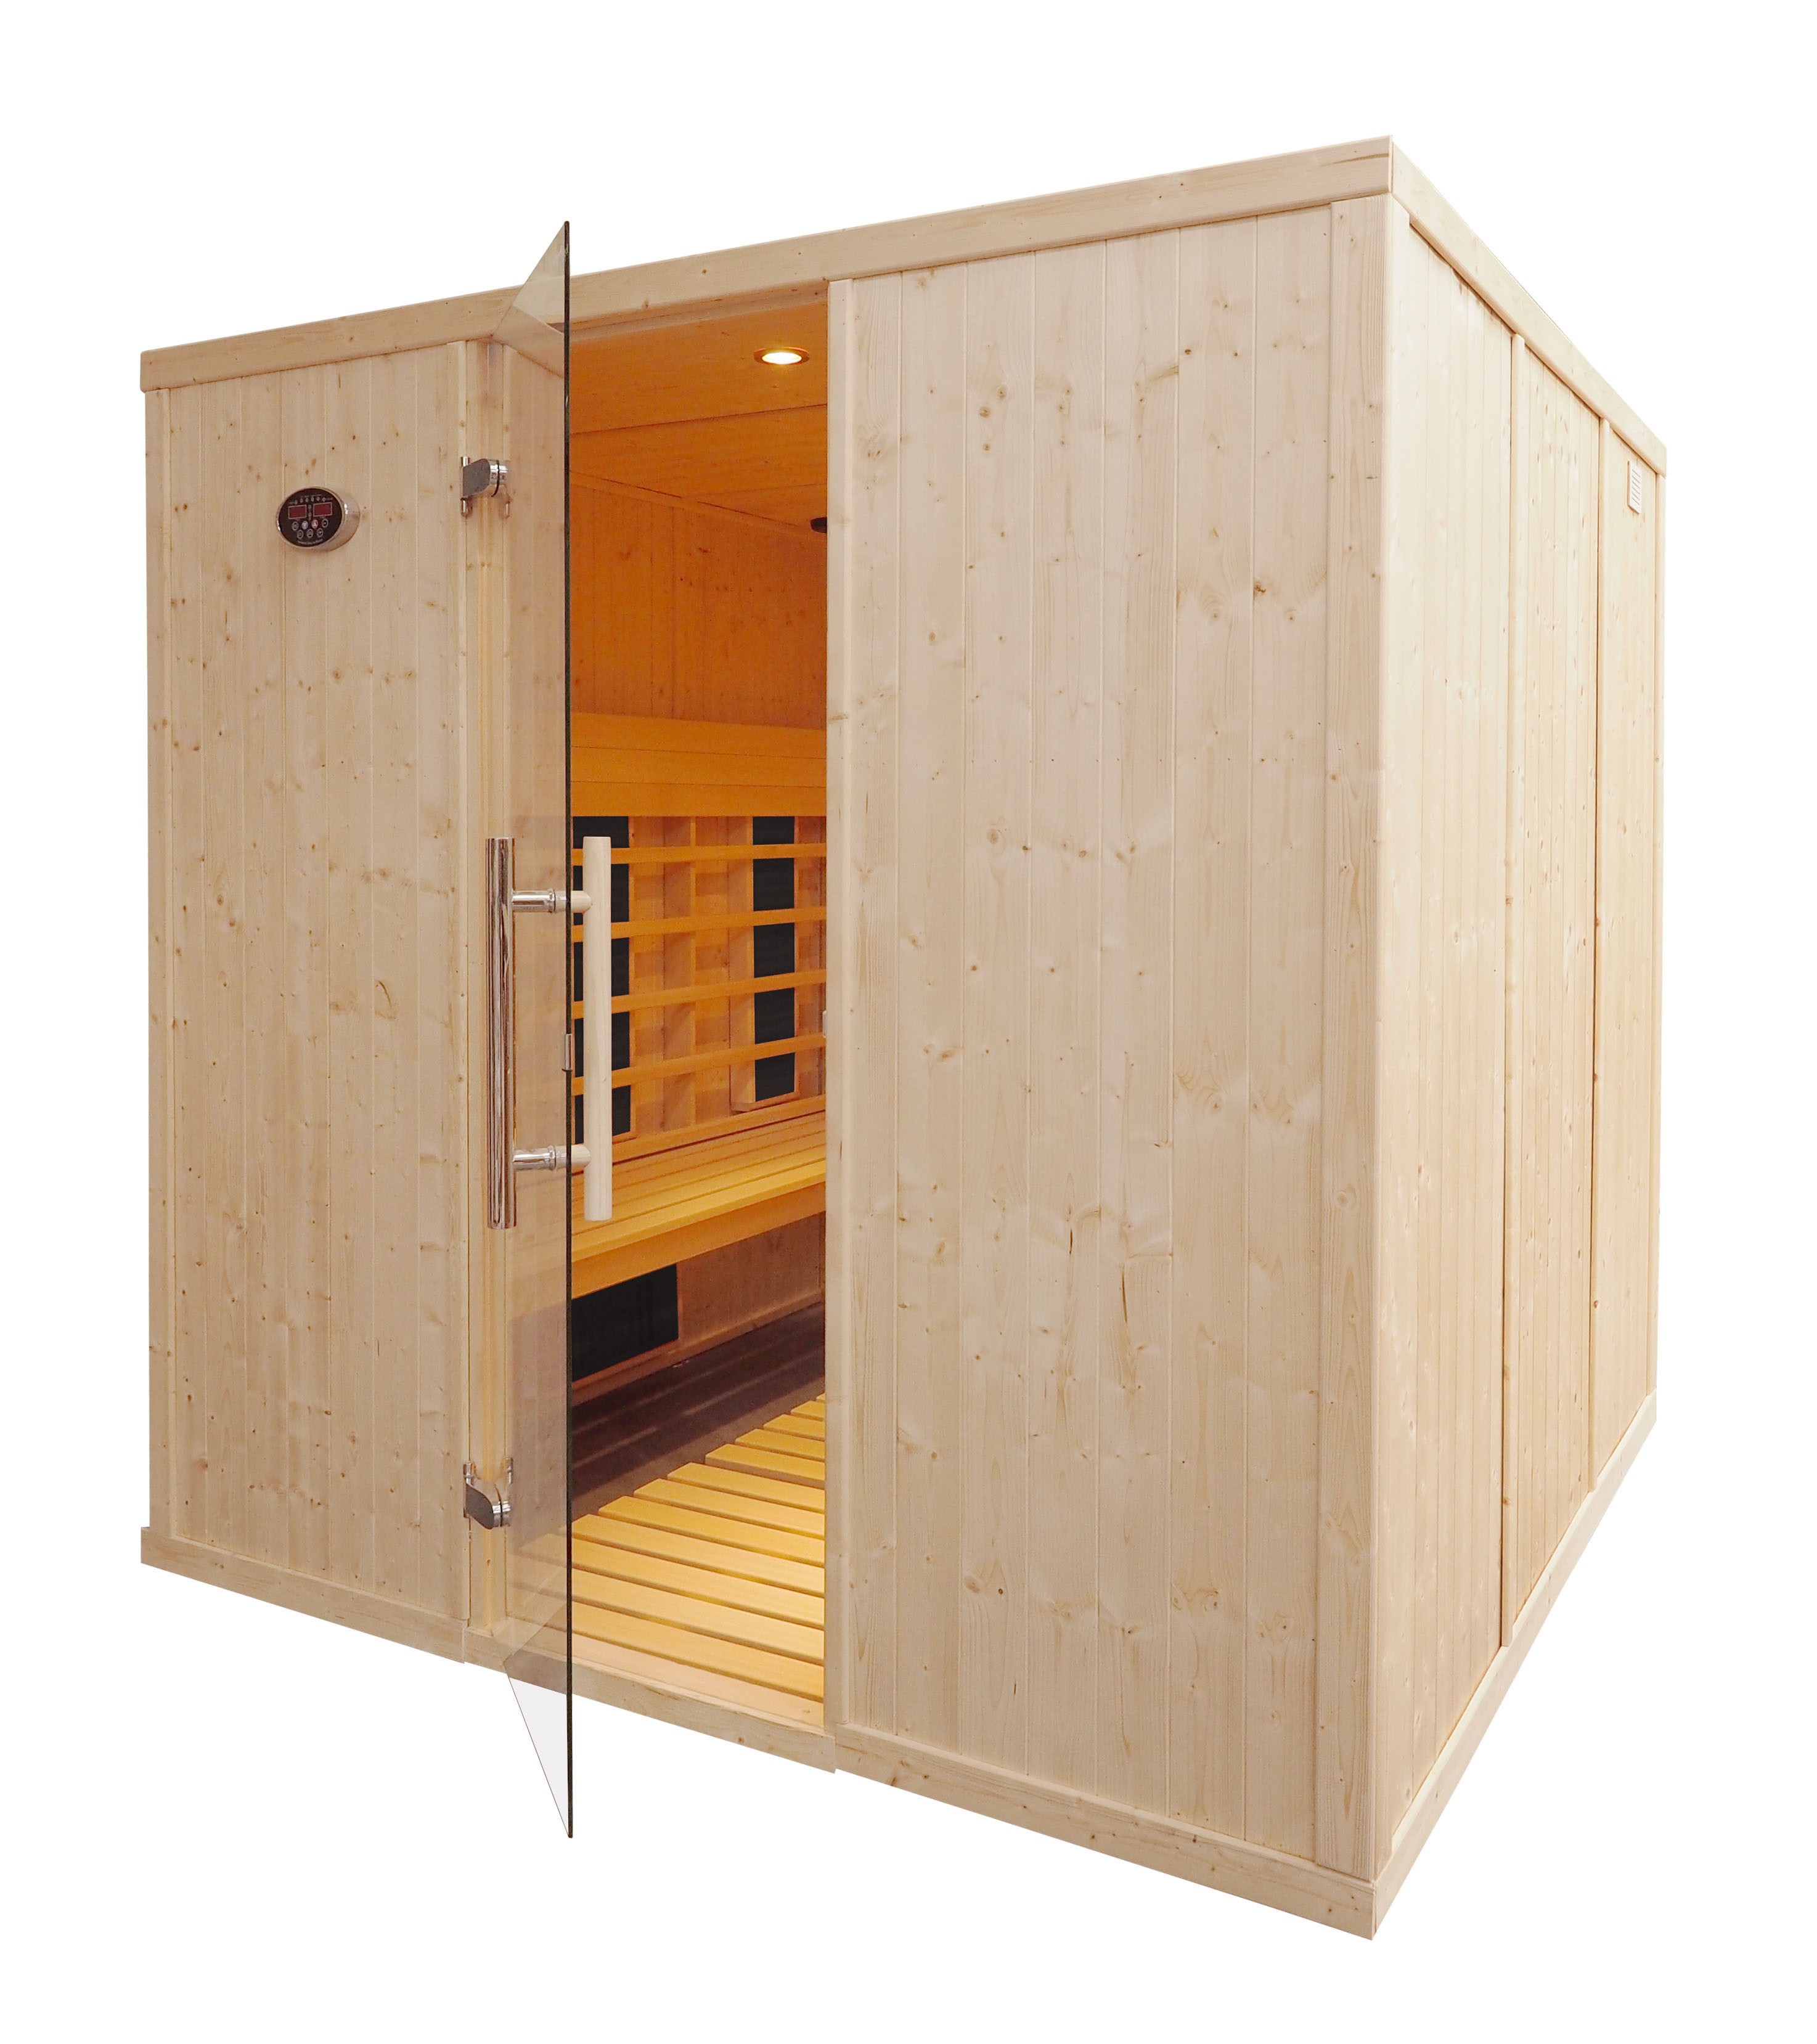 6 Person Commercial Infrared Sauna Parallel Benches IR3030